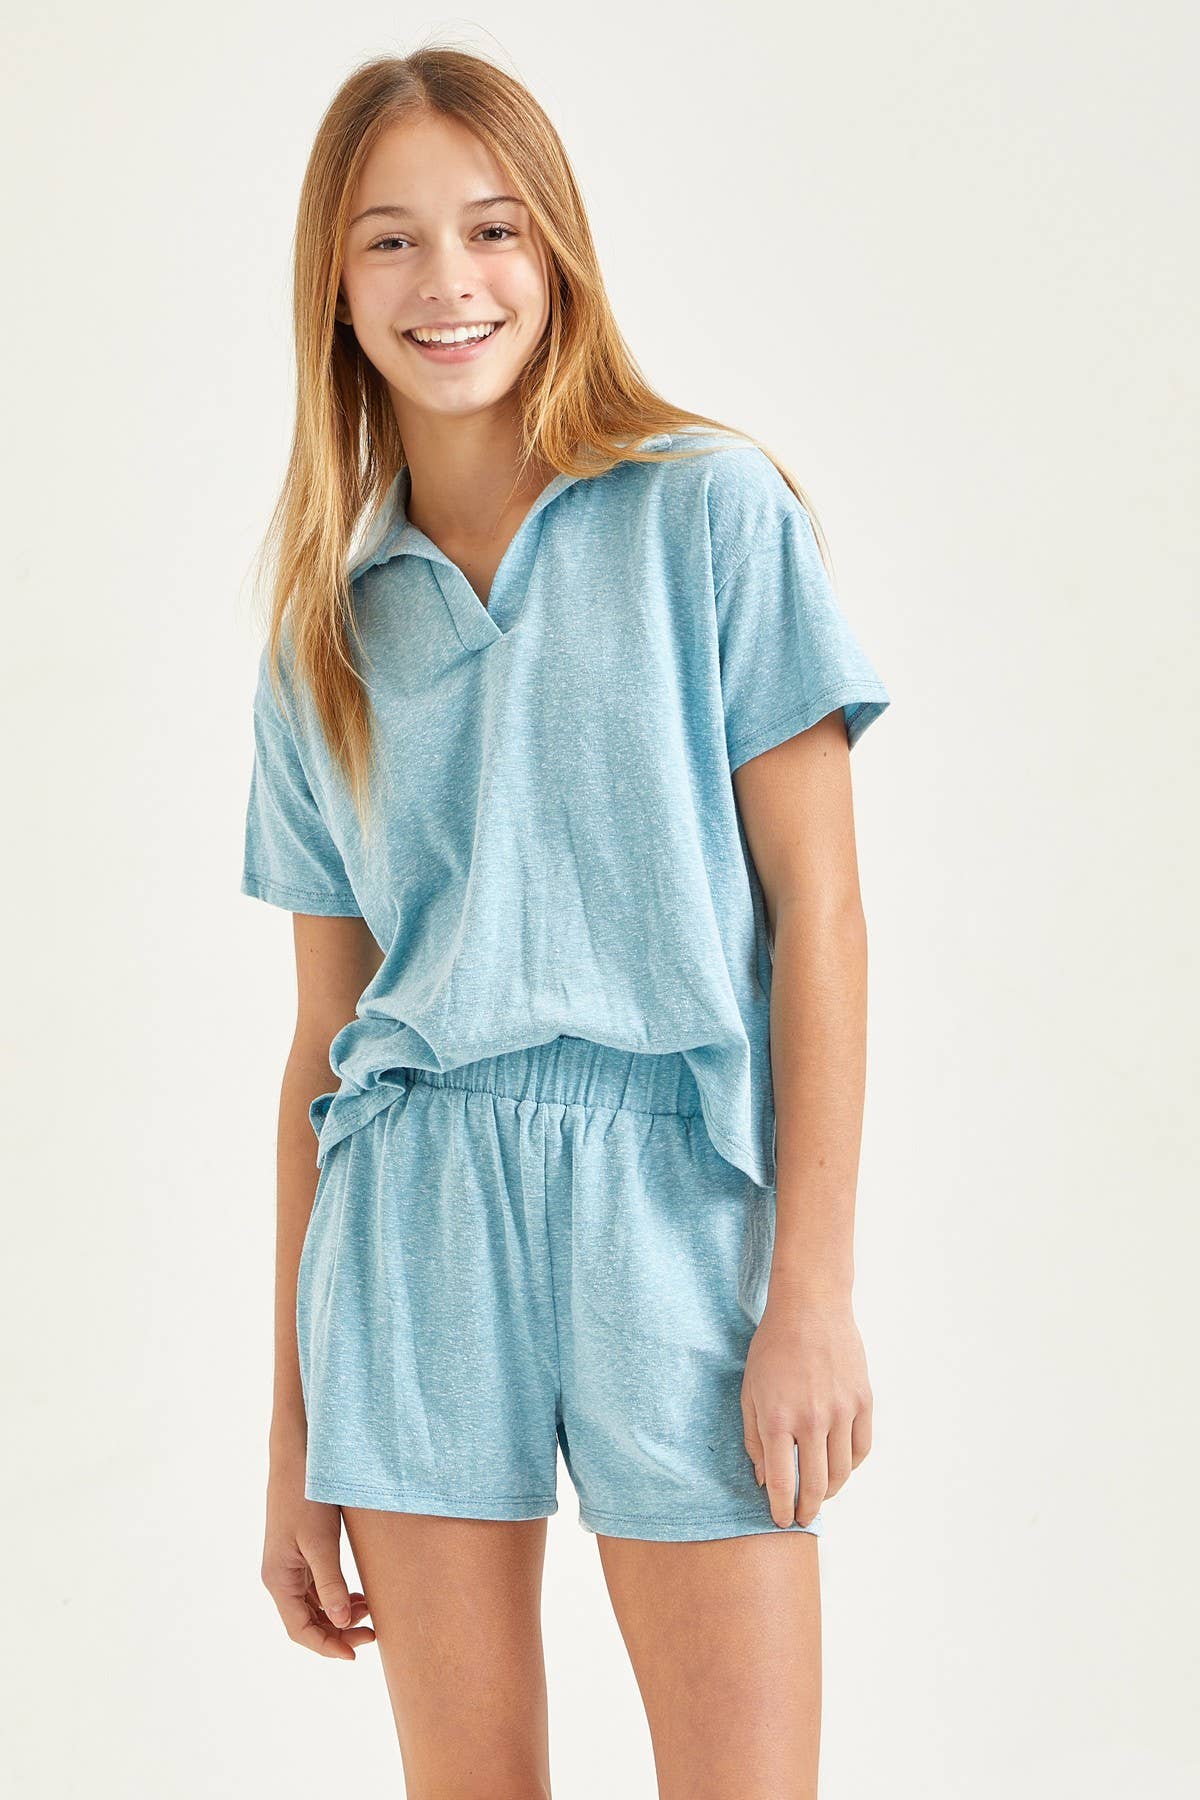 Collared Top and Shorts Matching Set- TWEEN